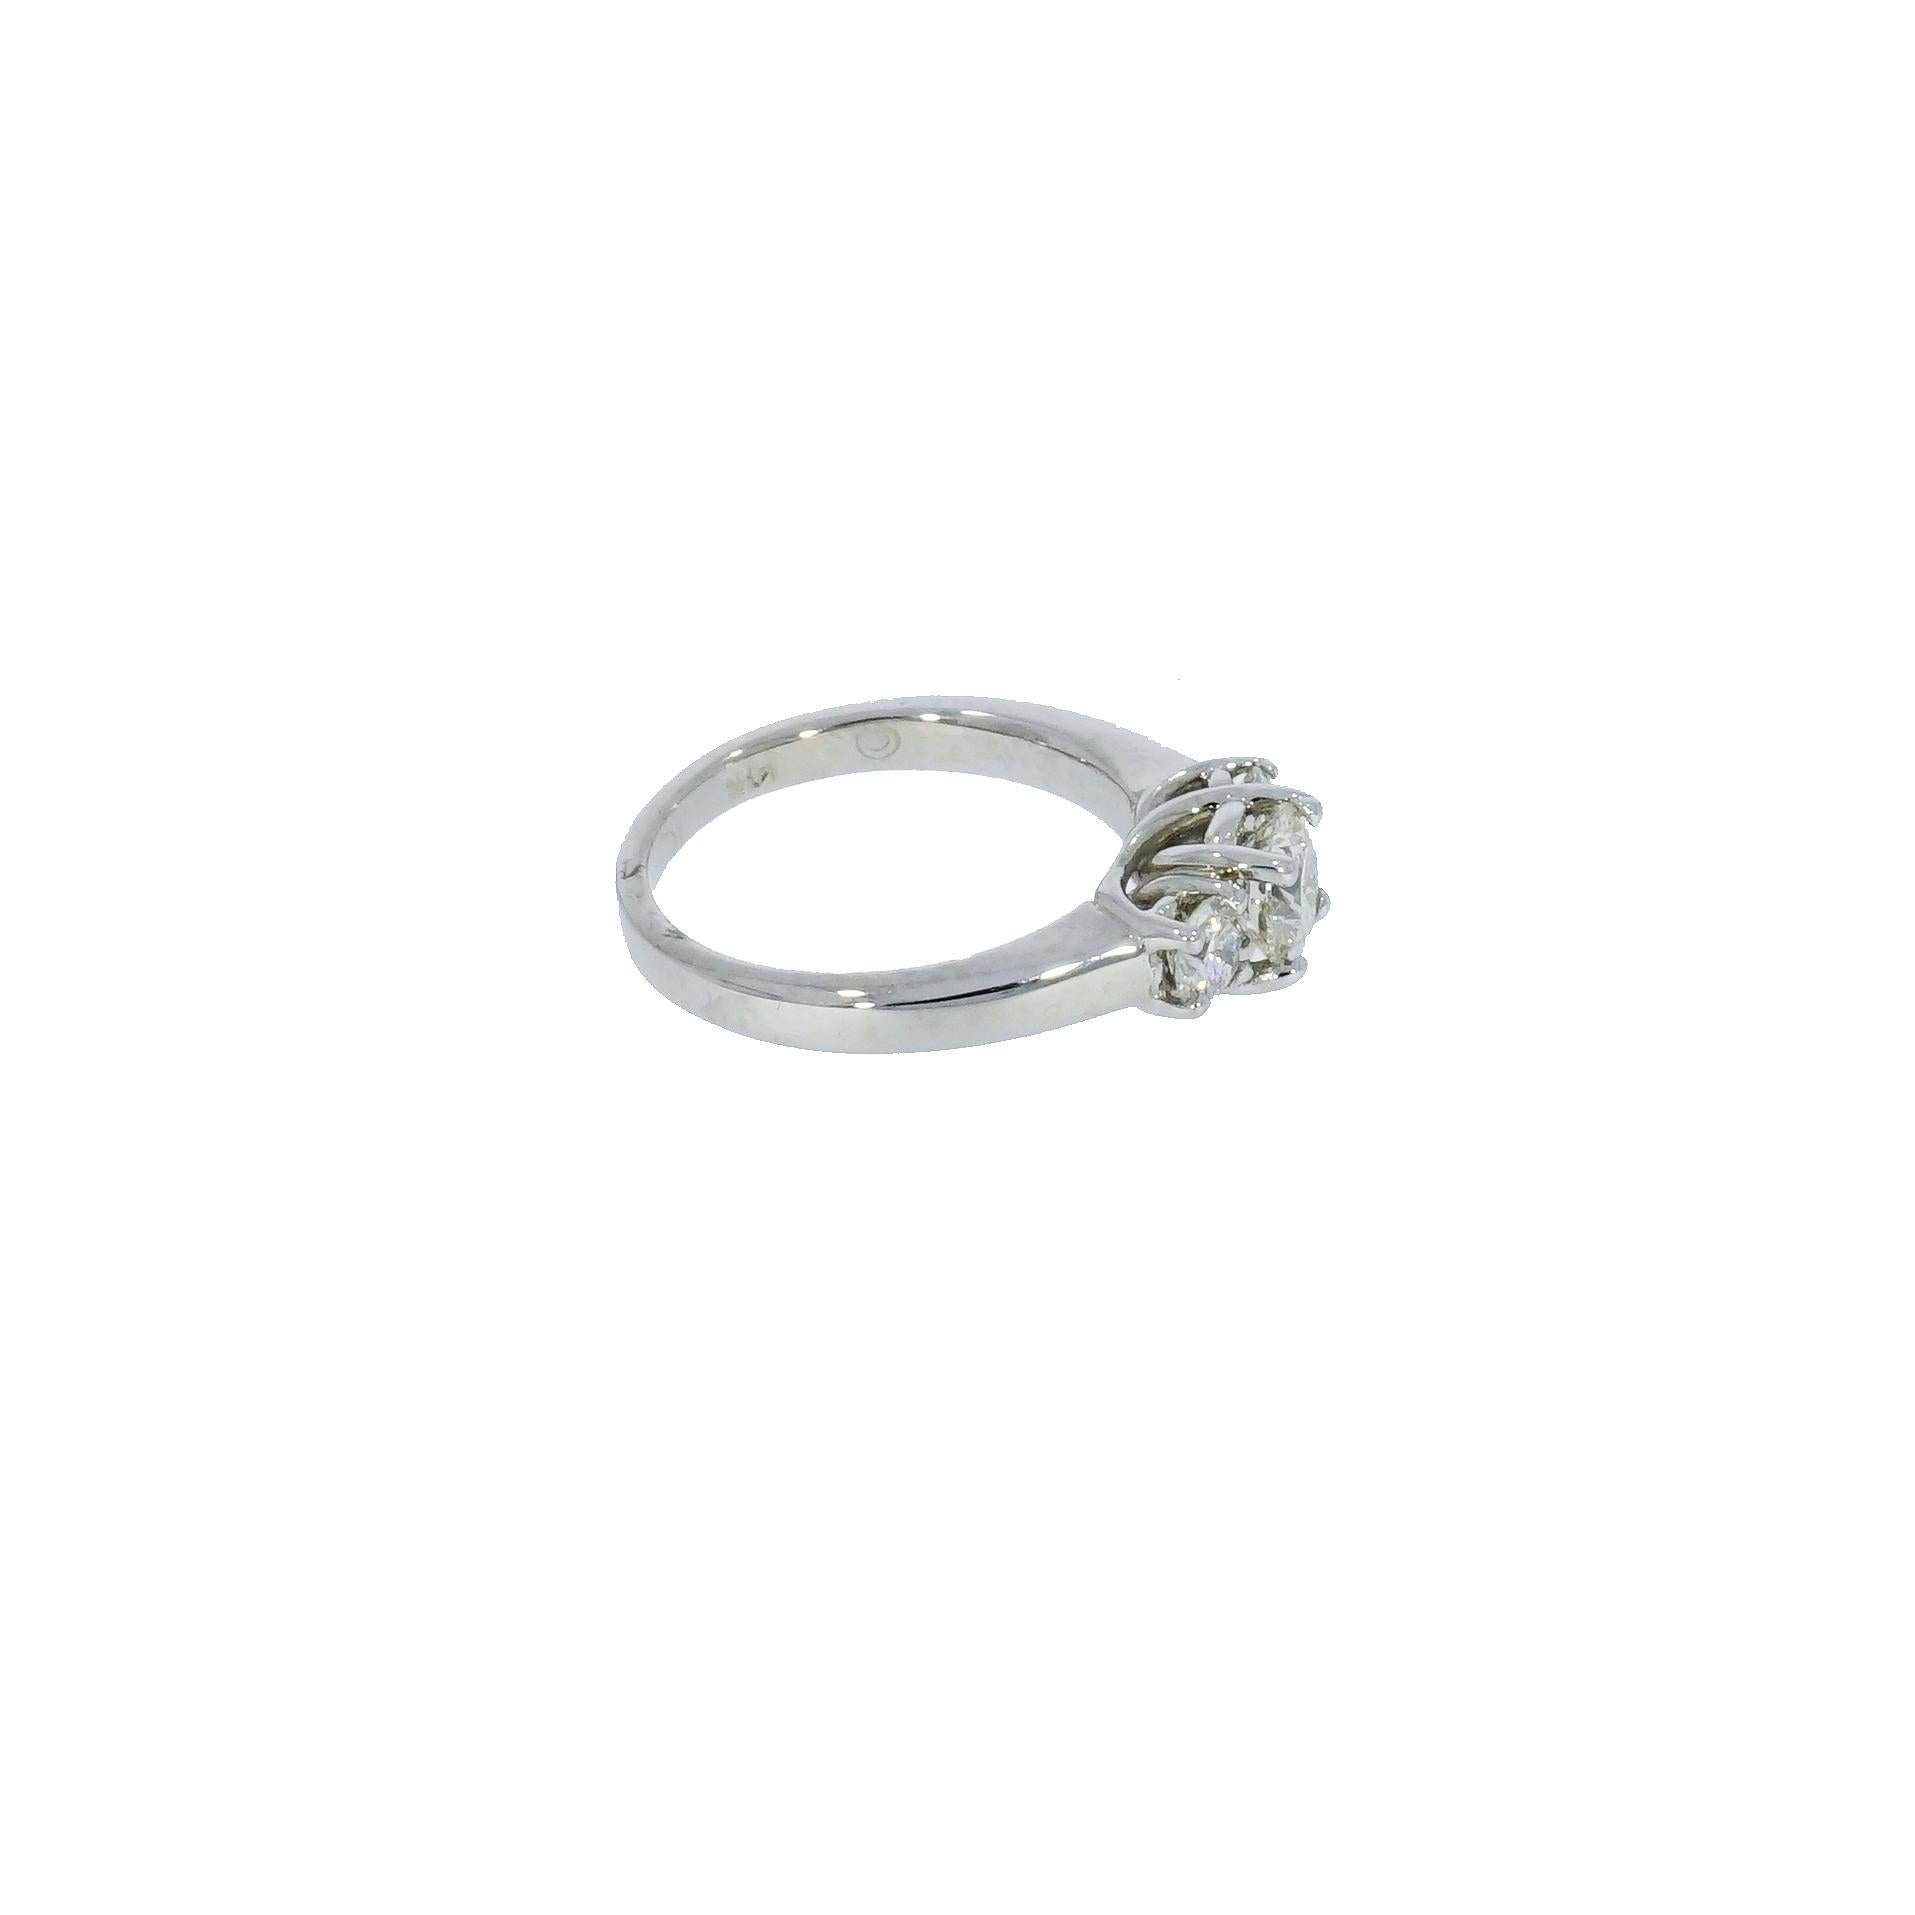 Three Stone Engagement Rings are one the most popular styles, giving you endless combinations possible. 
Crafted in 14k White Gold, this ring features a 0.75 carat, G/H color, SI1 clarity with 0.23 carat at each side.
Finger Size: 6.5
